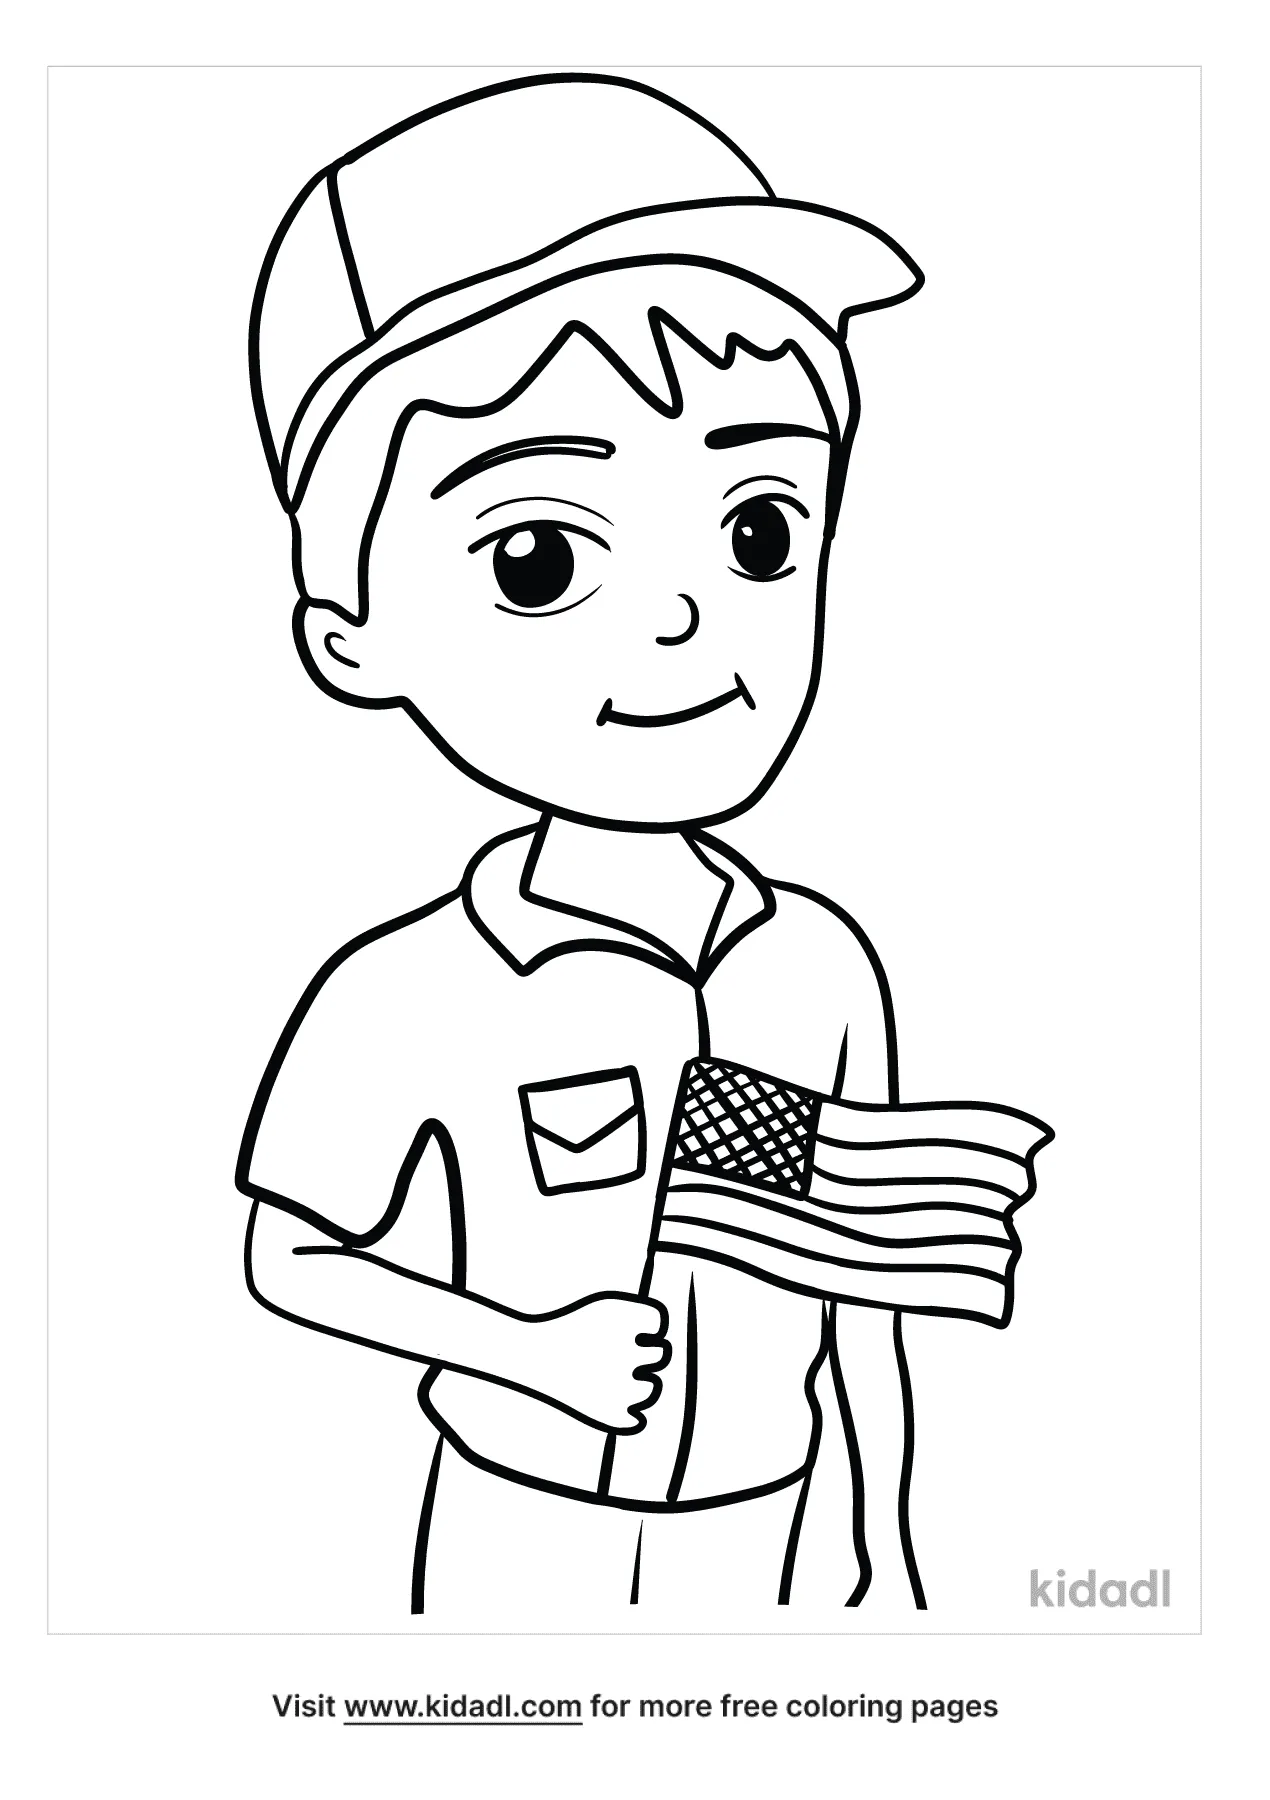 cubscout coloring pages